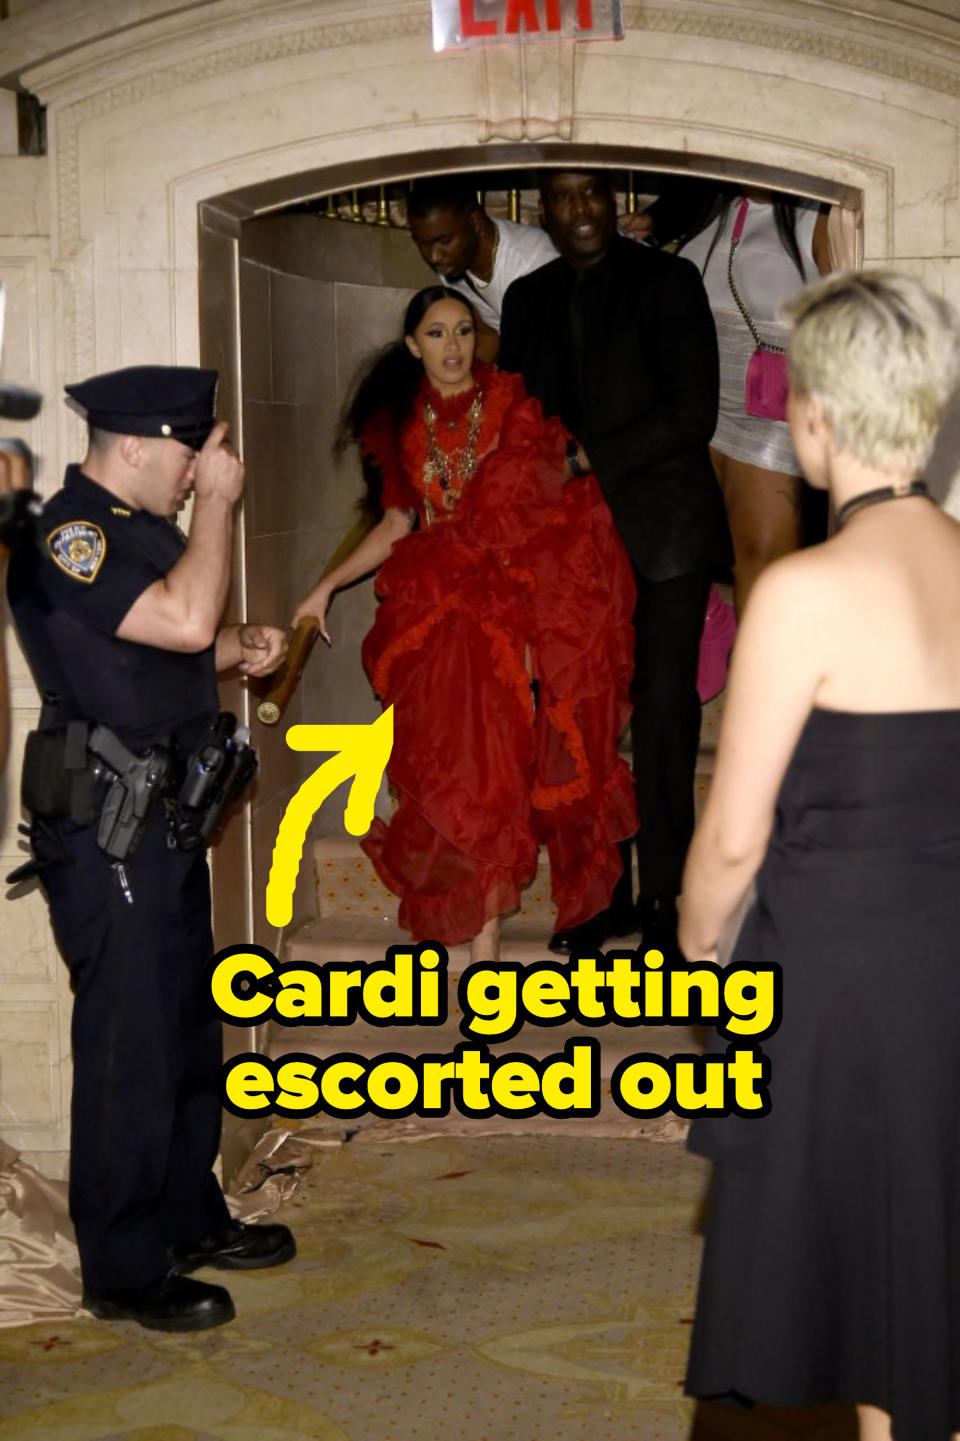 Cardi B in a voluminous ruffled dress with a person, exiting an event as others and security watch